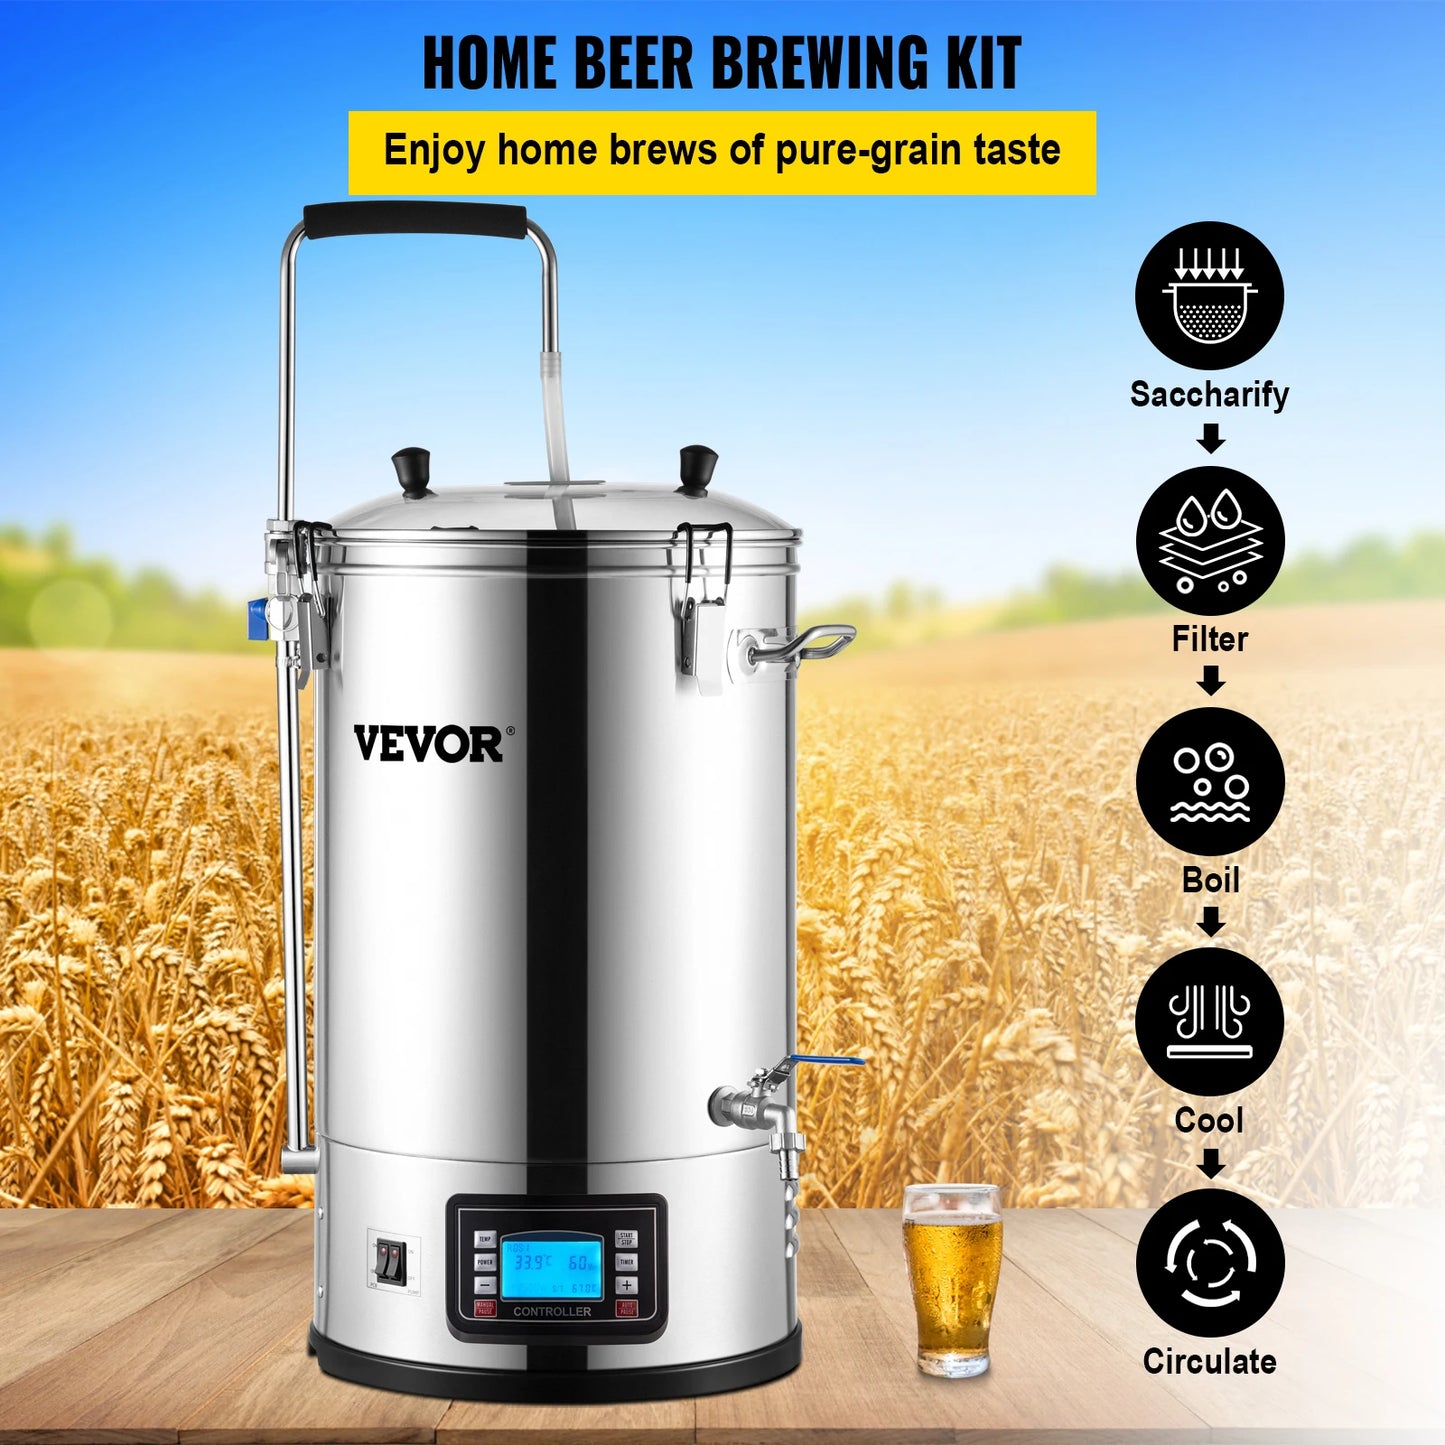 VEVOR 35L 110/220V 304 Stainless Steel All-in-One Home Beer Brewer Electric Brewing System with Pump